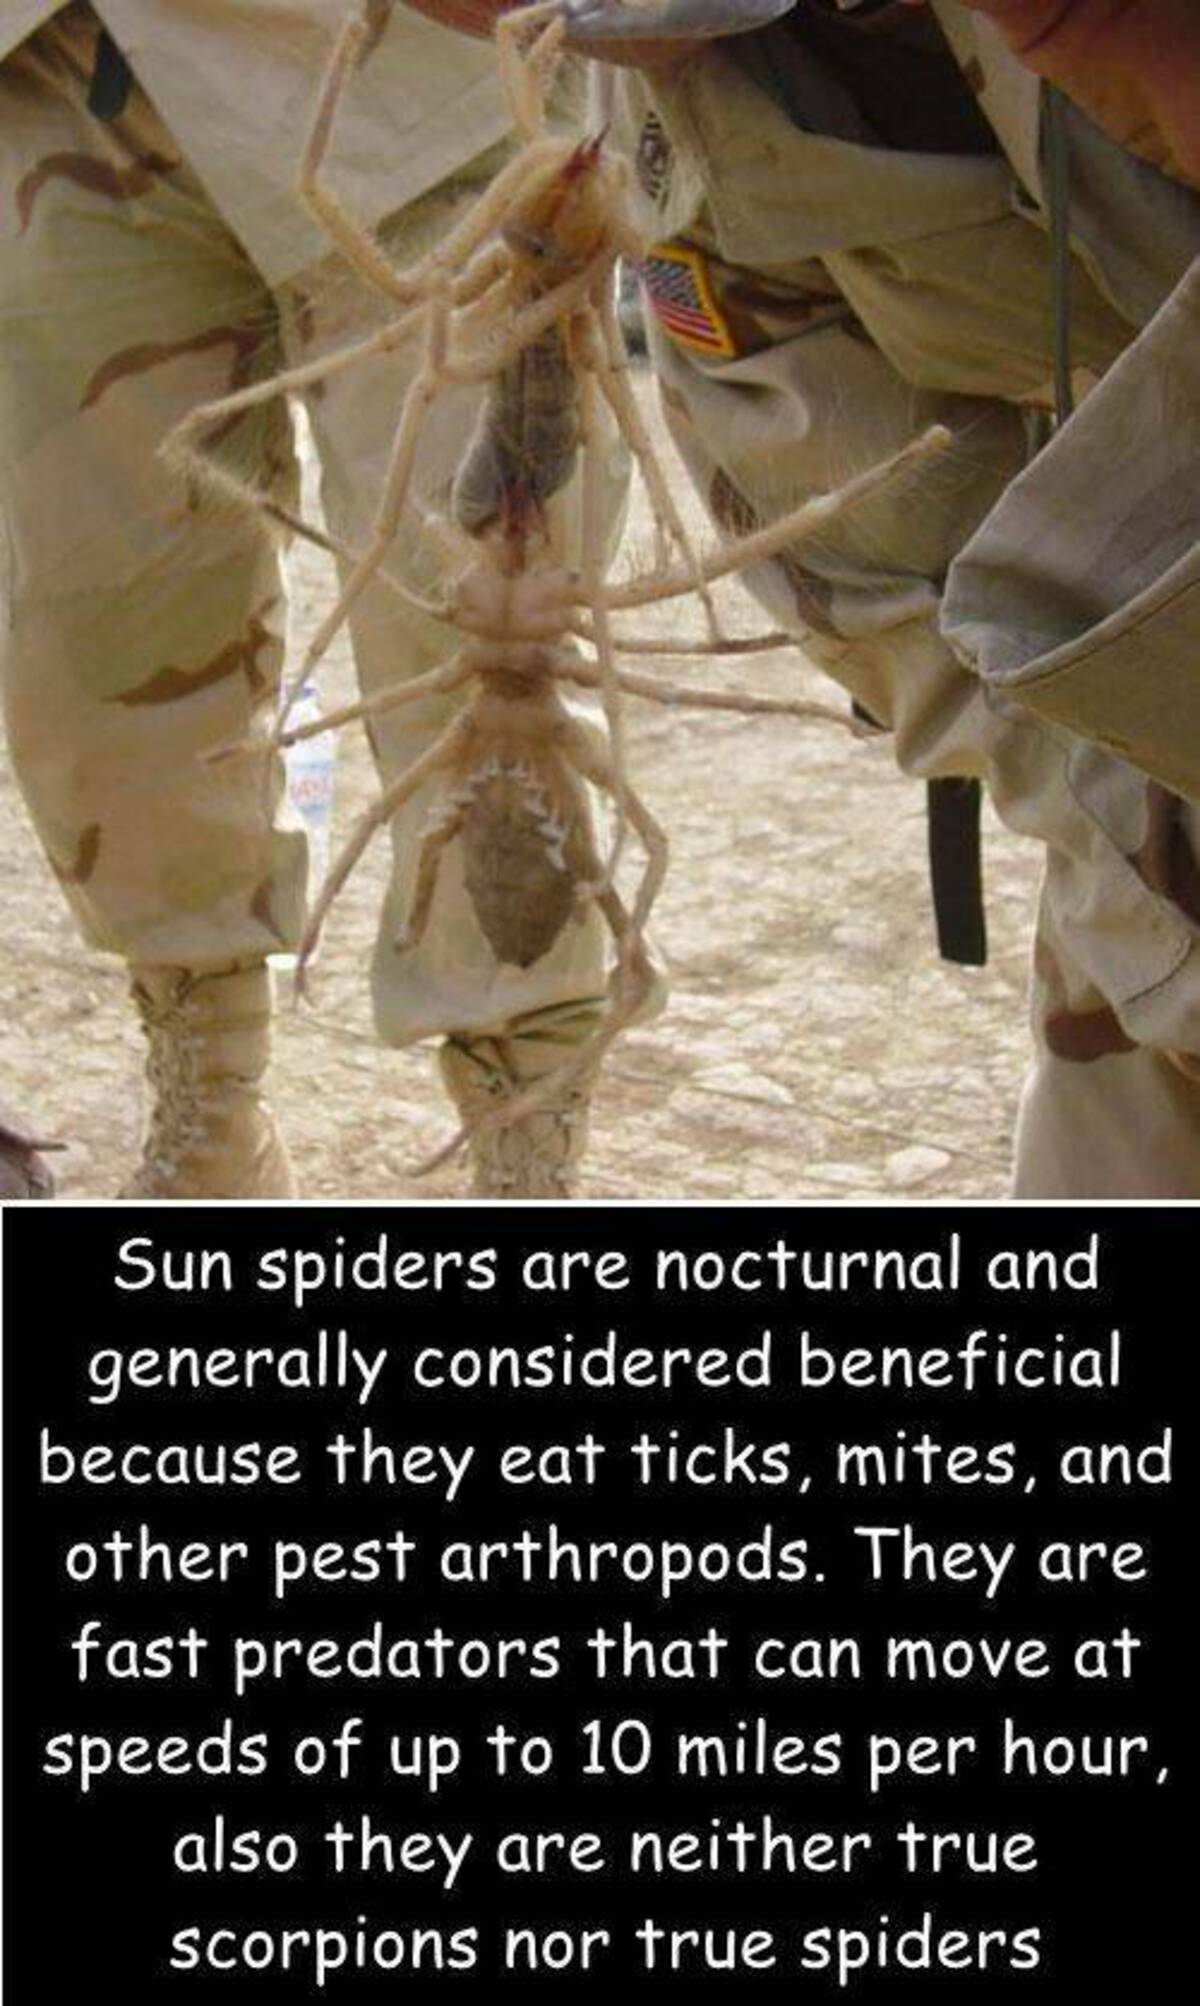 Sun spiders are nocturnal and generally considered beneficial because they eat ticks, mites, and other pest arthropods. They are fast predators that can move at speeds of up to 10 miles per hour, also they are neither true scorpions nor true spiders